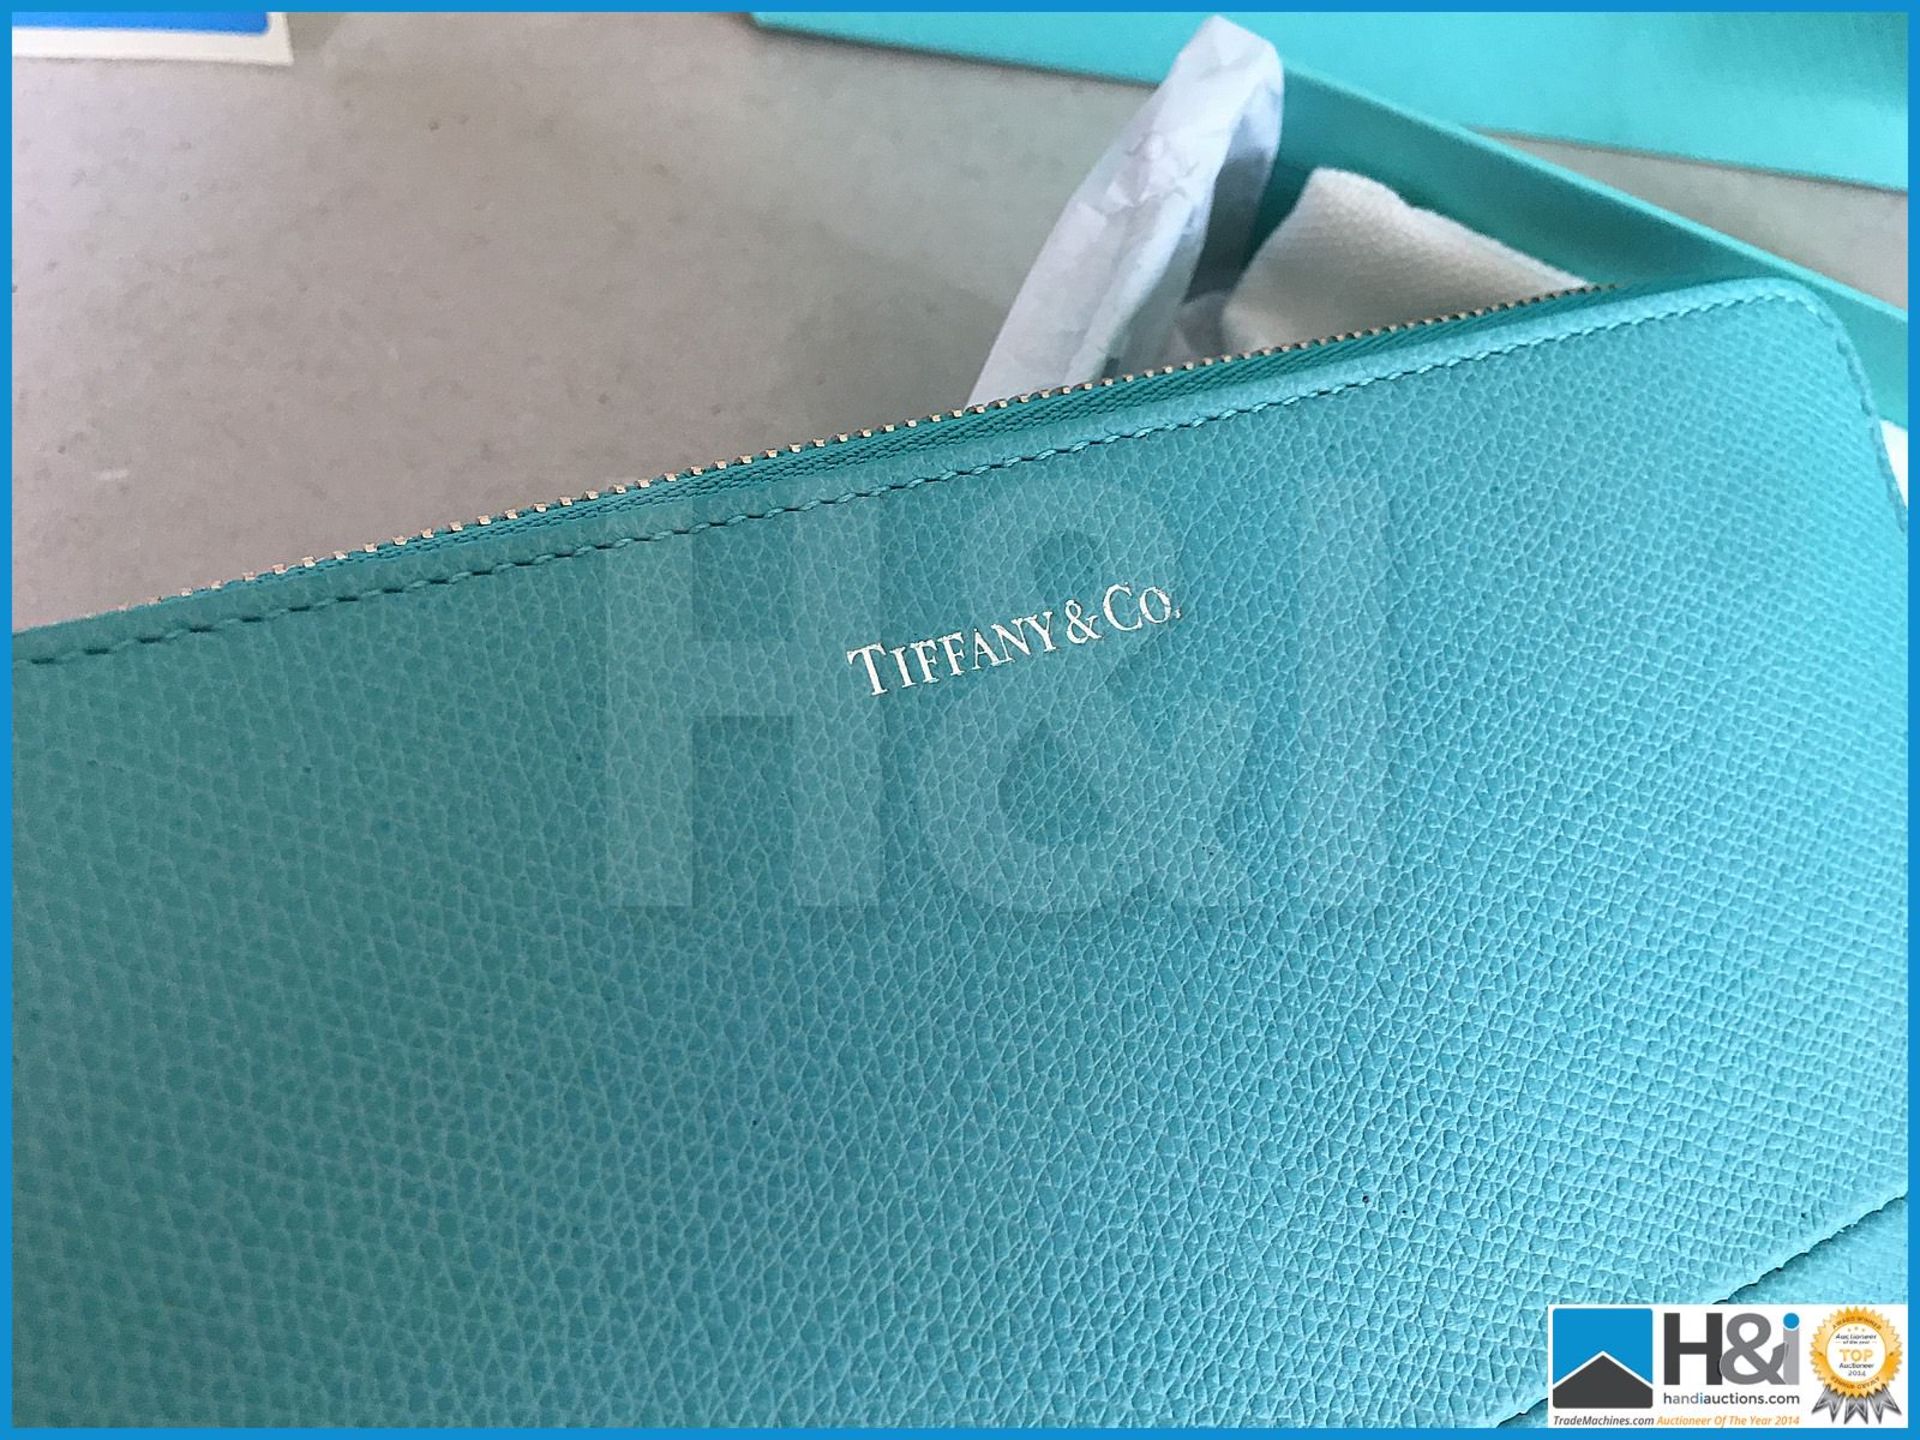 Genuine Tiffany & Co Purse / Wallet in Robins Egg Blue completely unused still with card protectors - Image 2 of 11